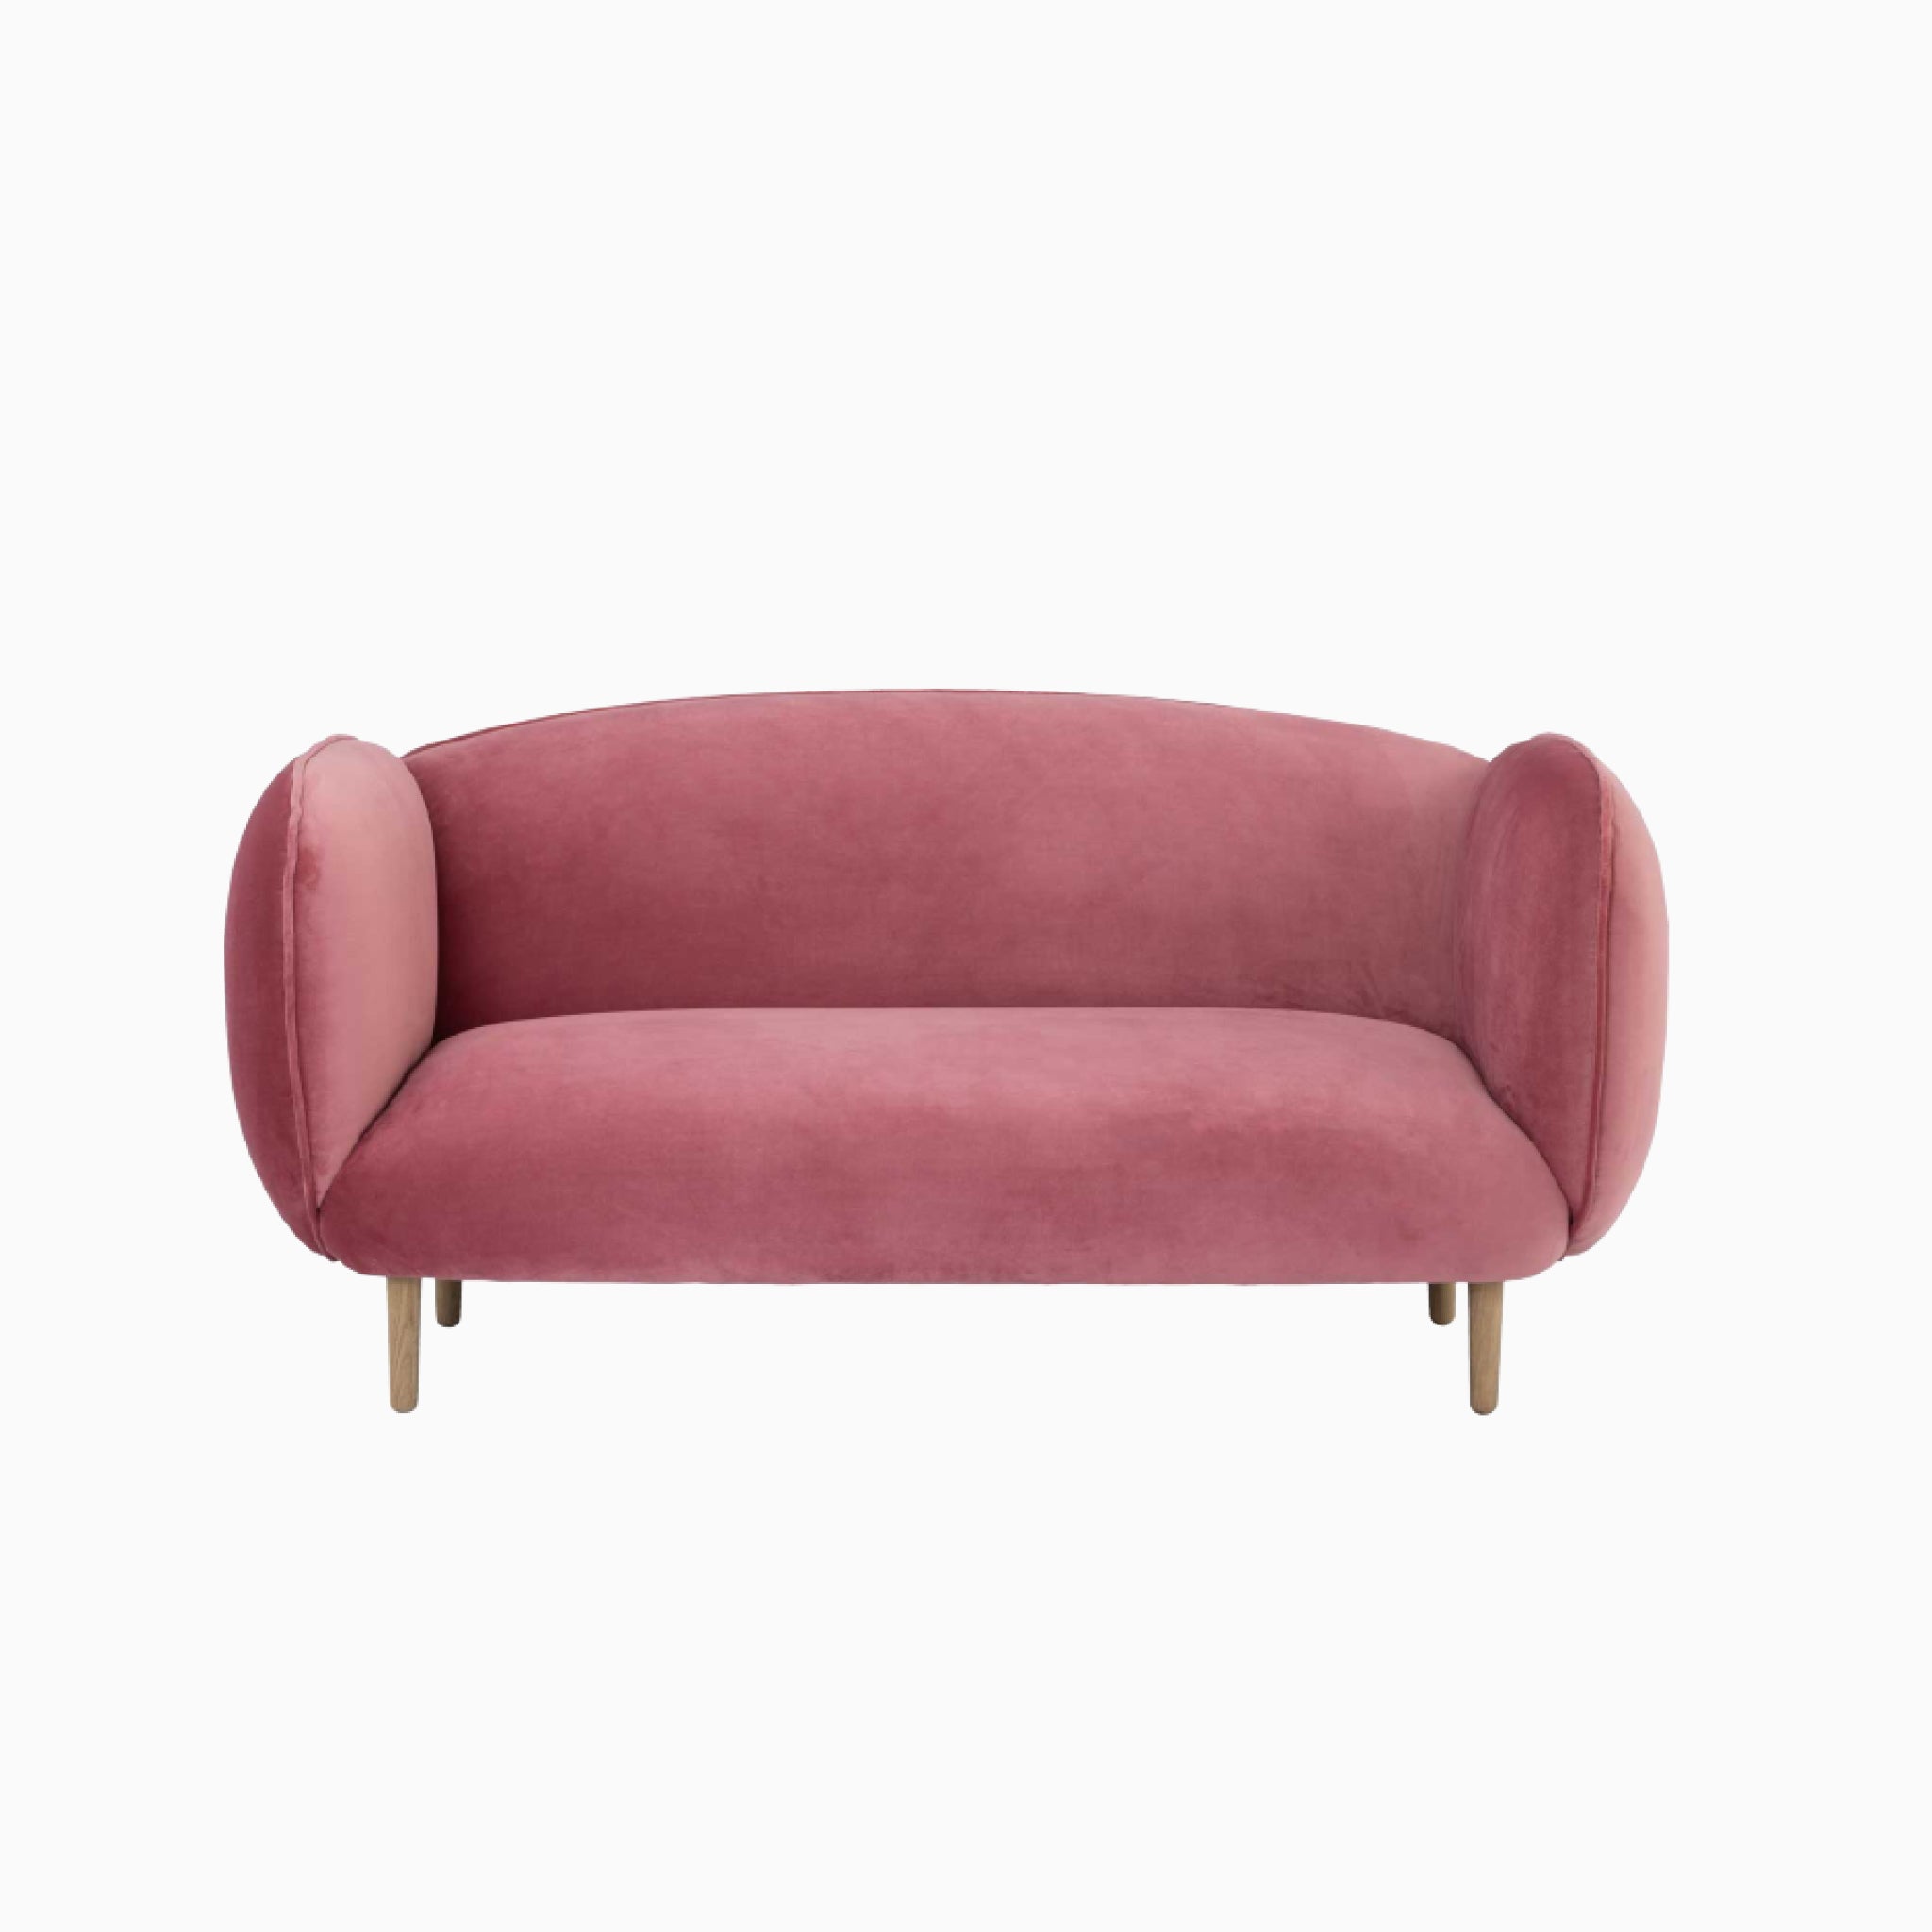 Nord 2 Seater Sofa with Saxony Fabric